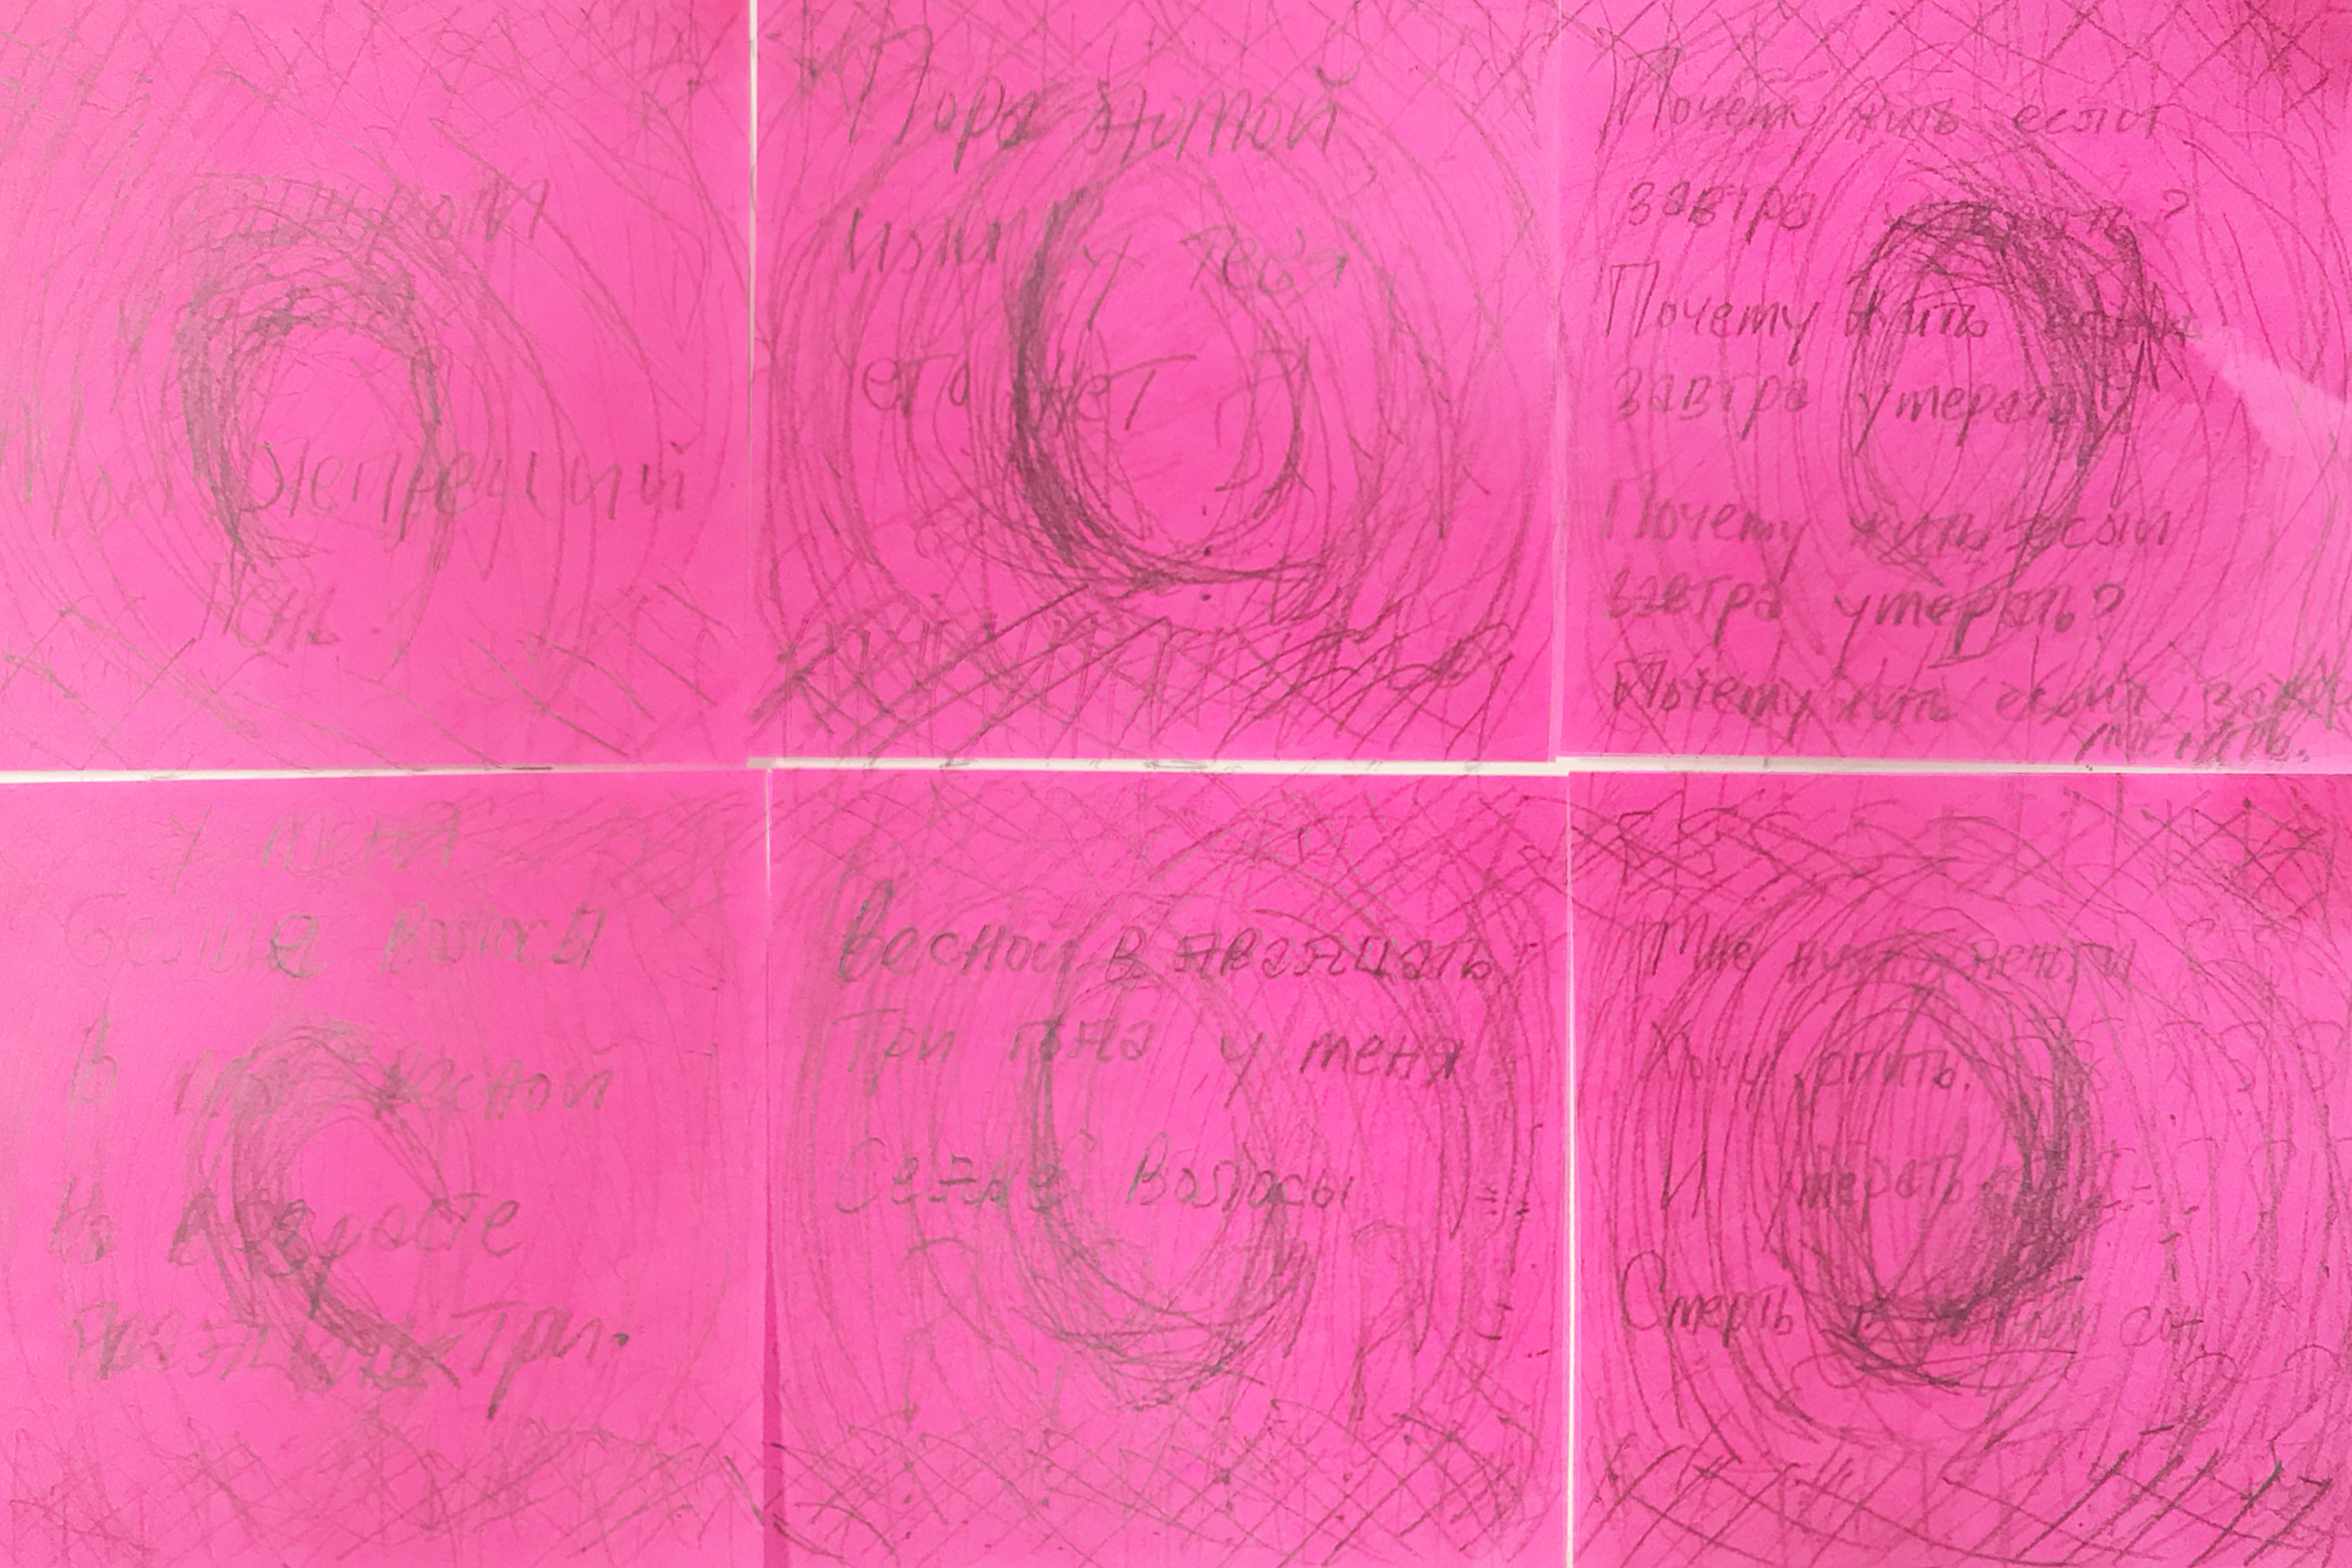 Six pink post-it notes with various doodles and unreadable text in Russian.